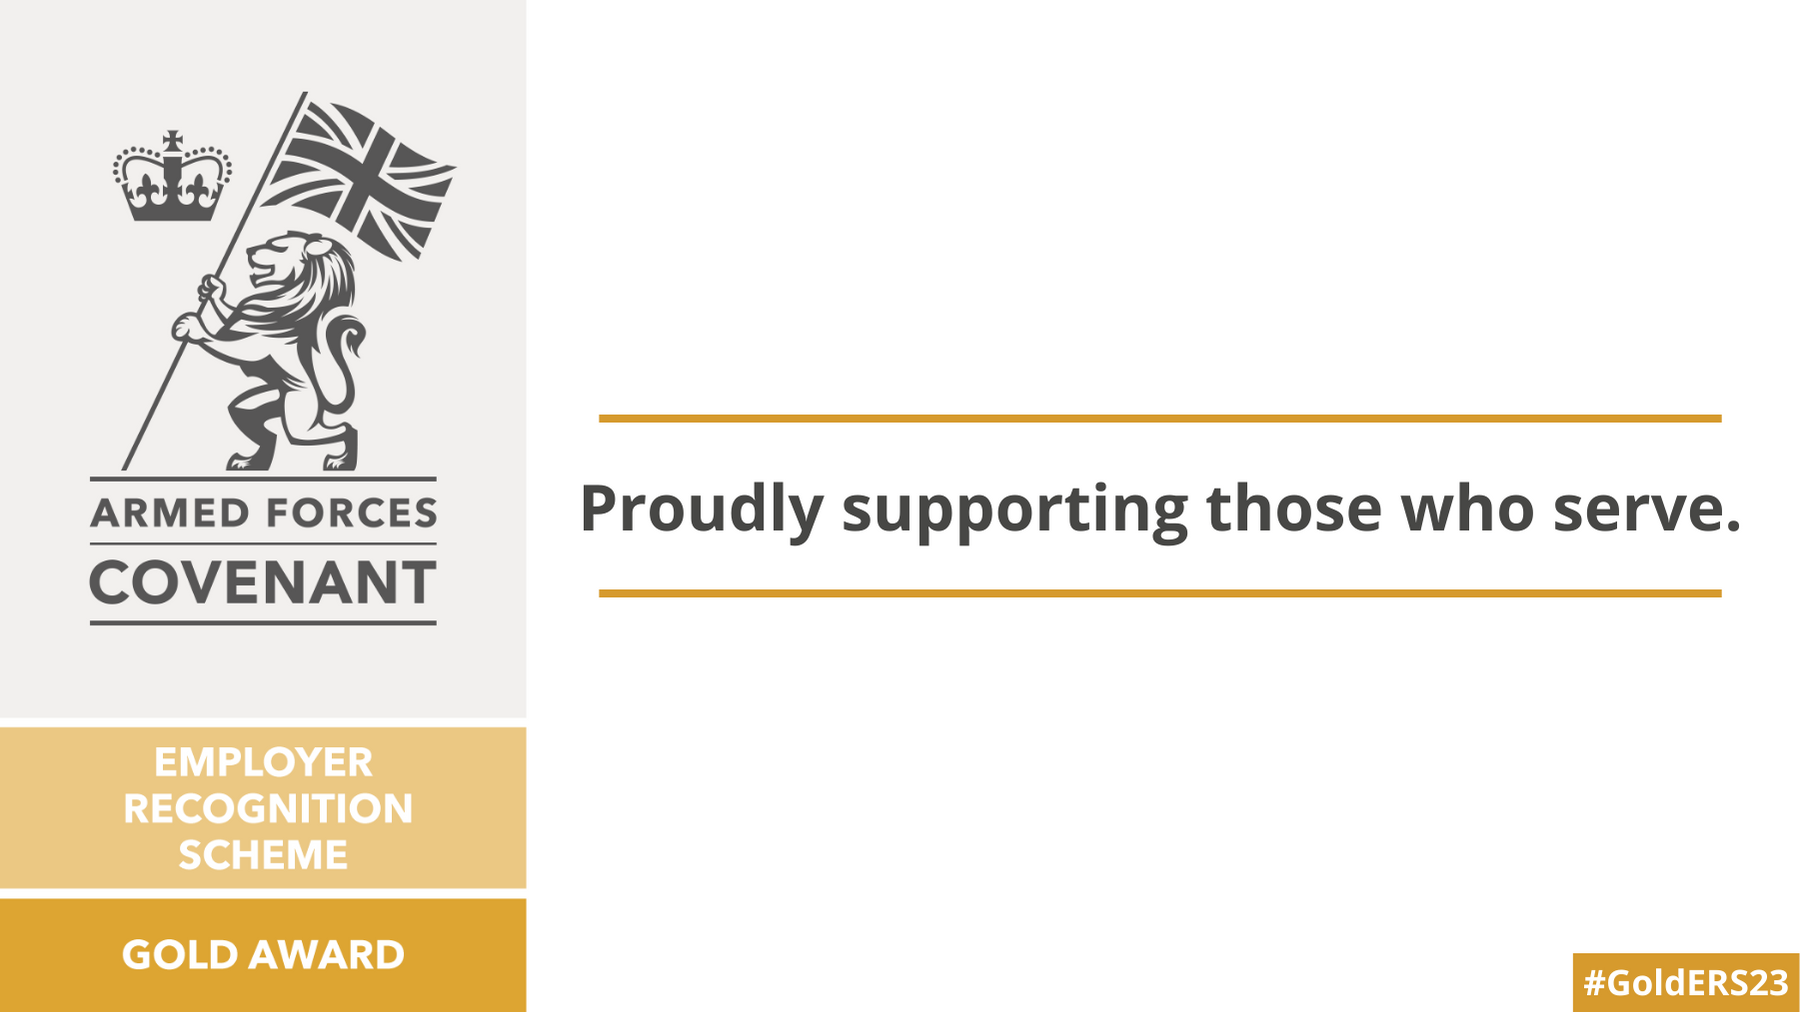 Proudly supporting - Gold - LinkedIn